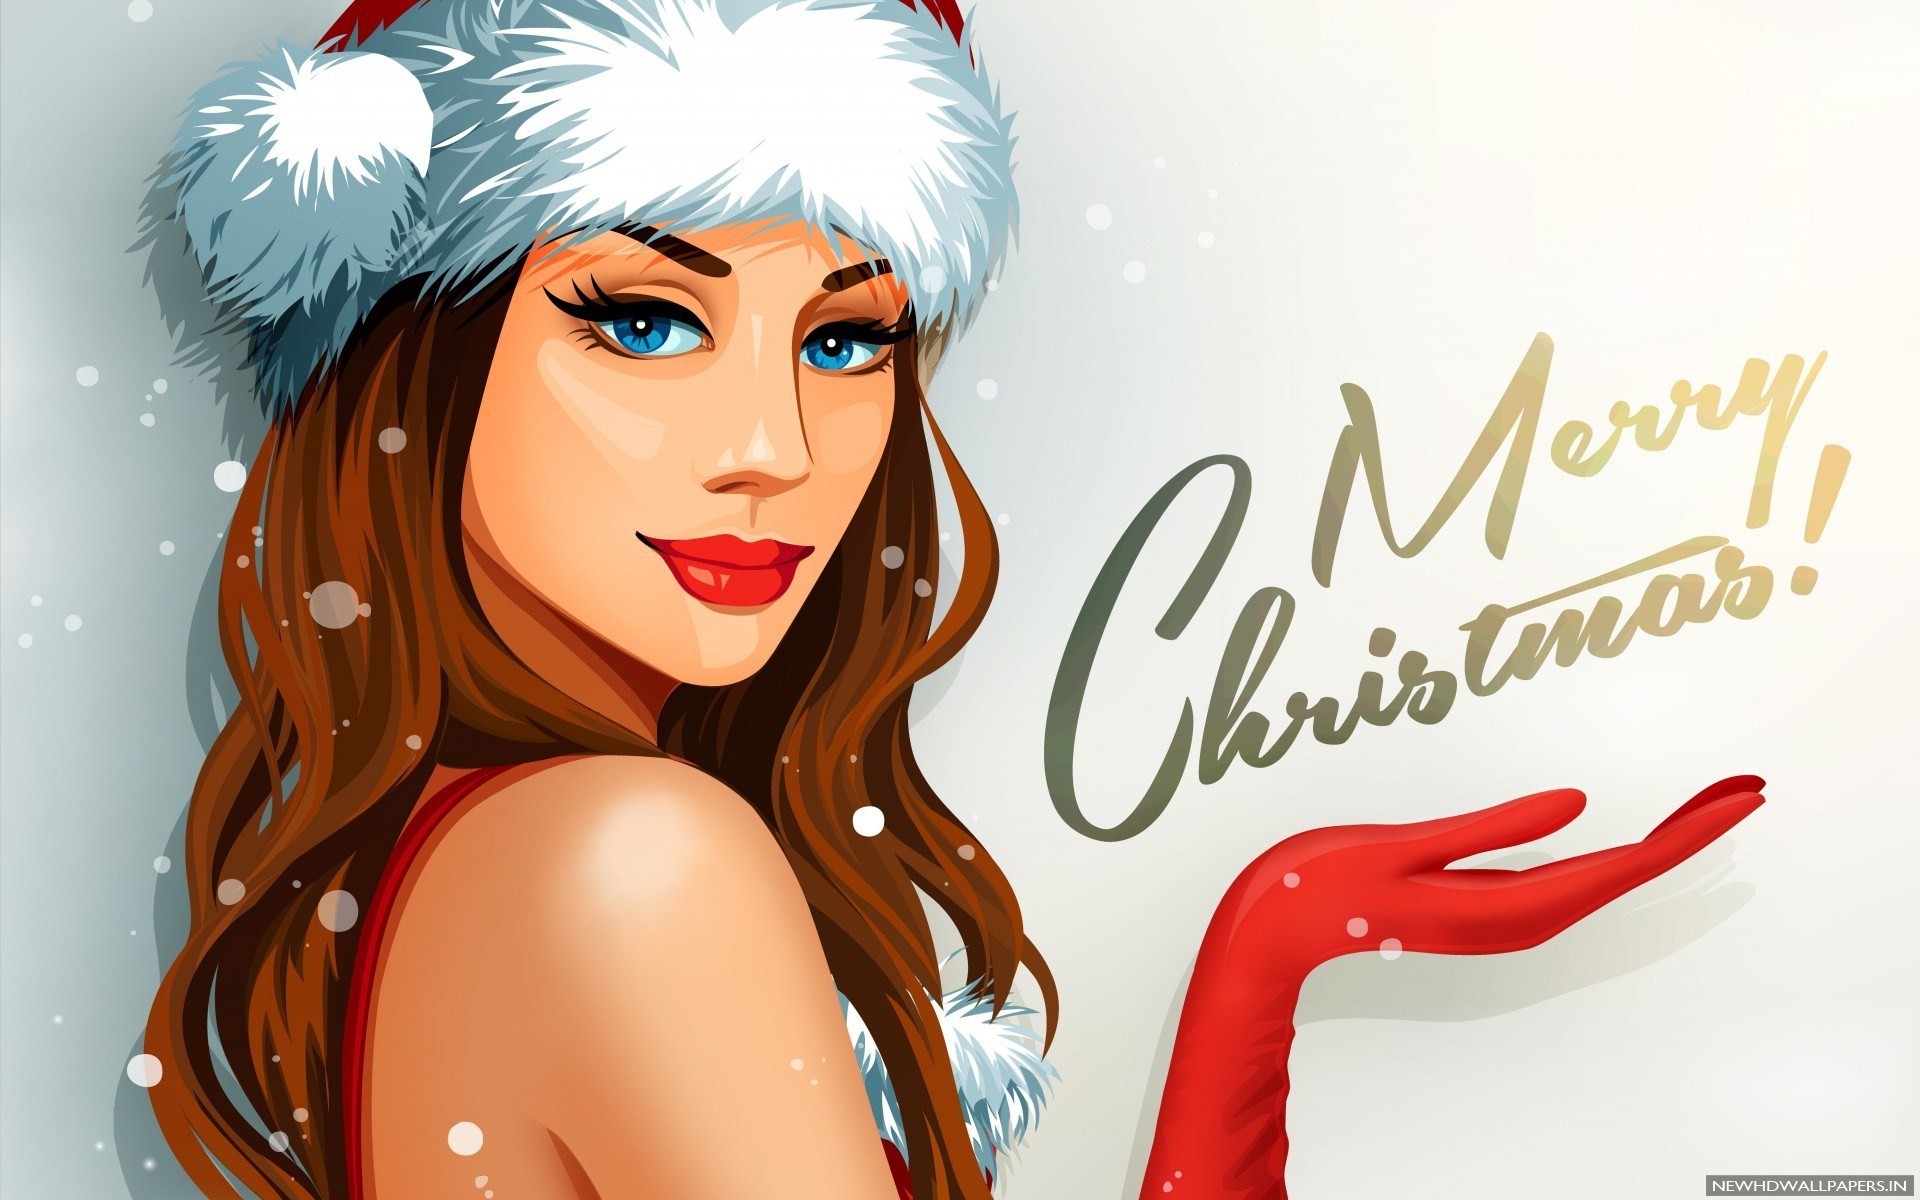 christmas dp profile pictures for whatsapp facebook